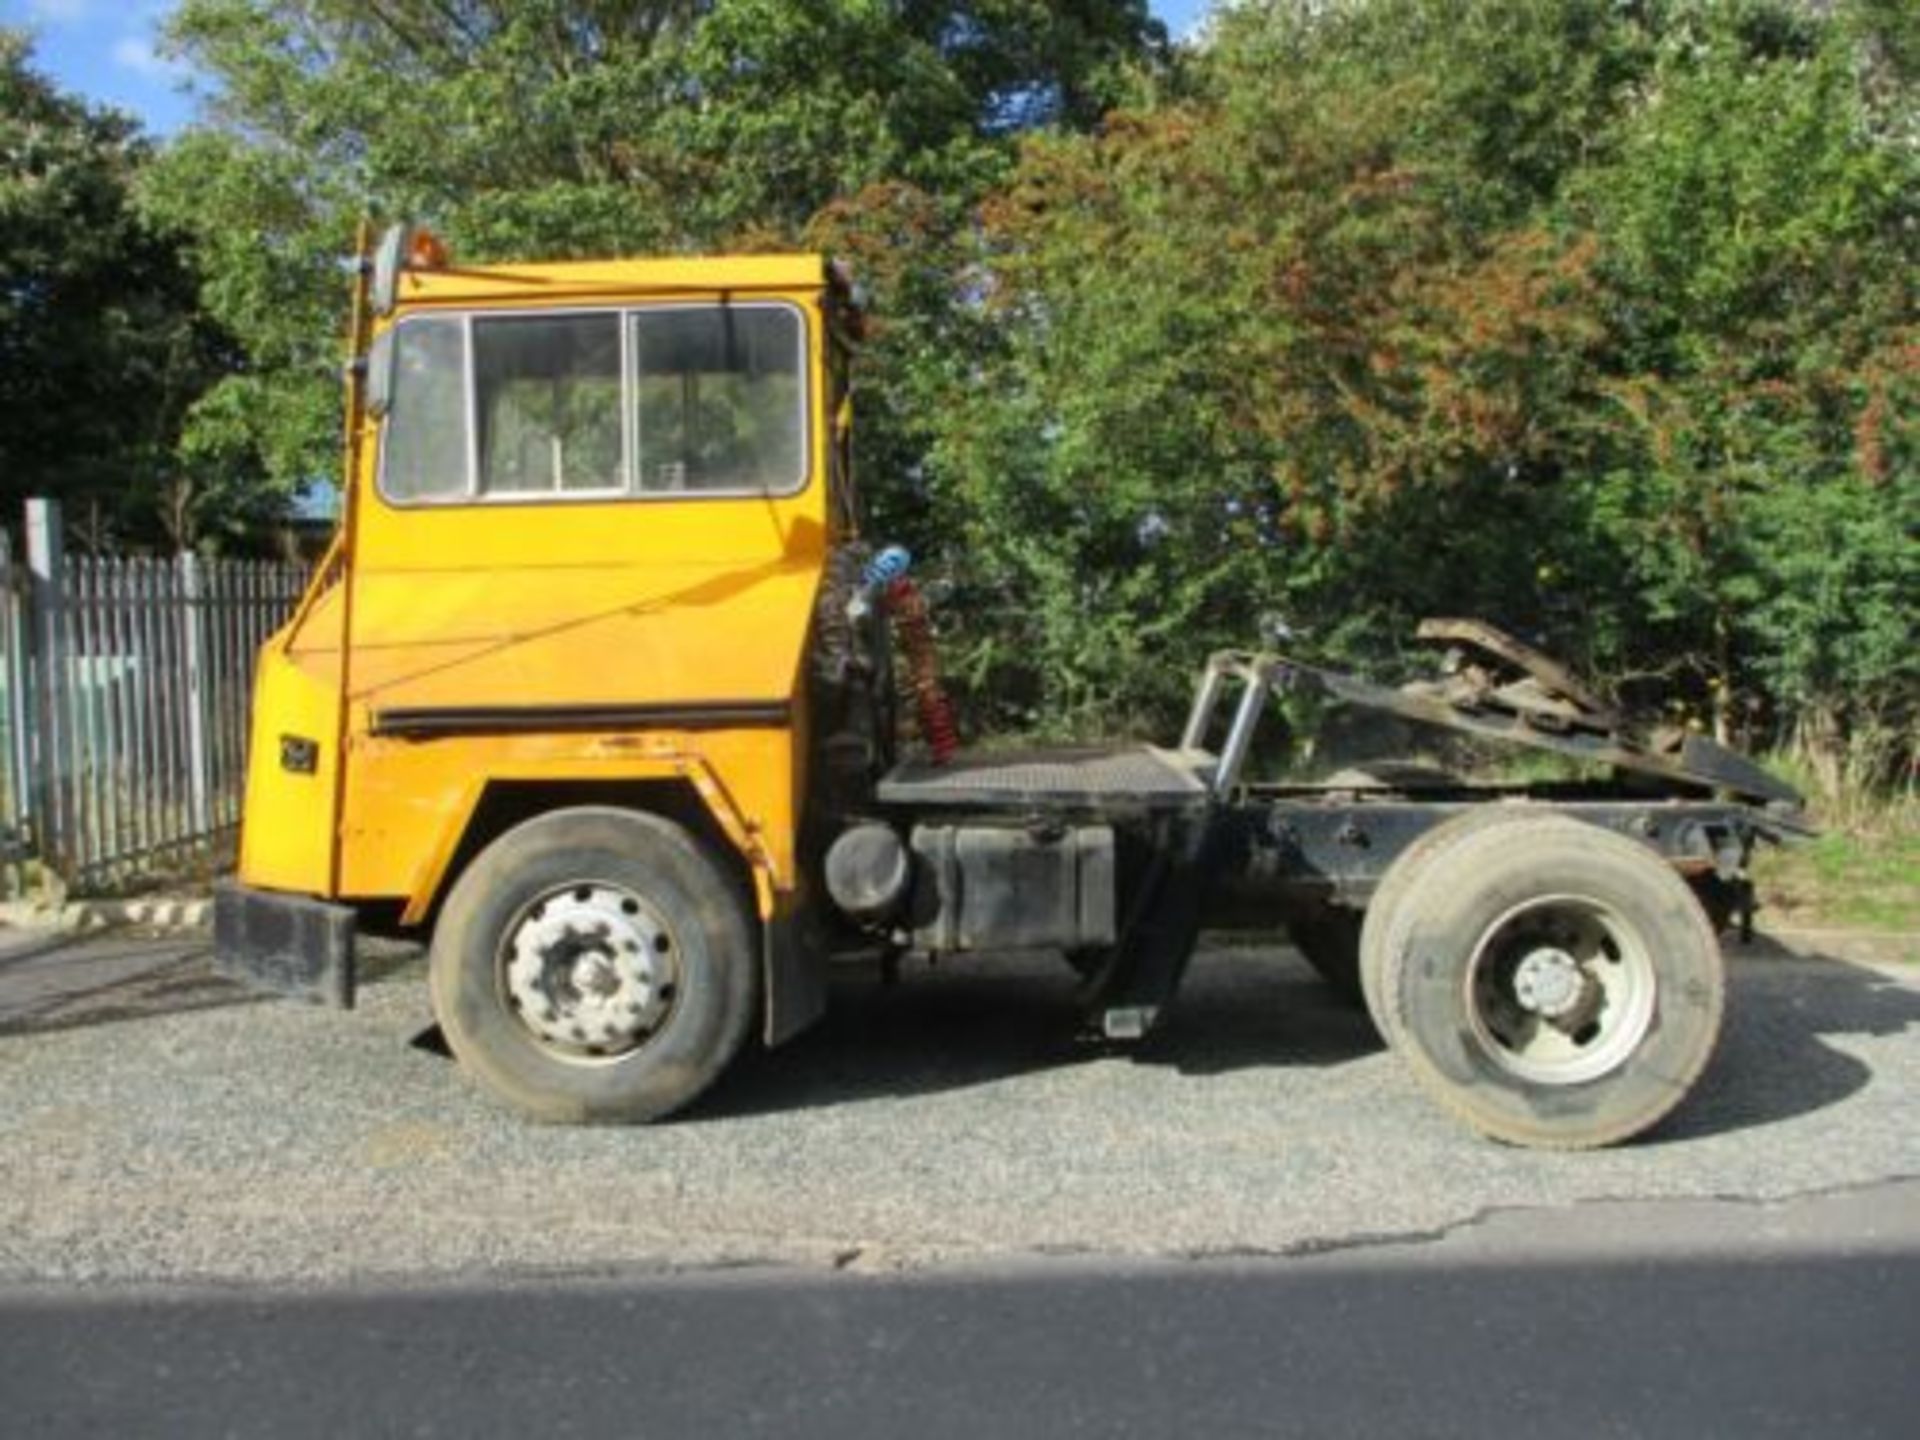 RELIANCE DOCK SPOTTER SHUNTER TOW TUG TRACTOR UNIT PERKINS V8 TERBERG DELIVERY - Image 9 of 11